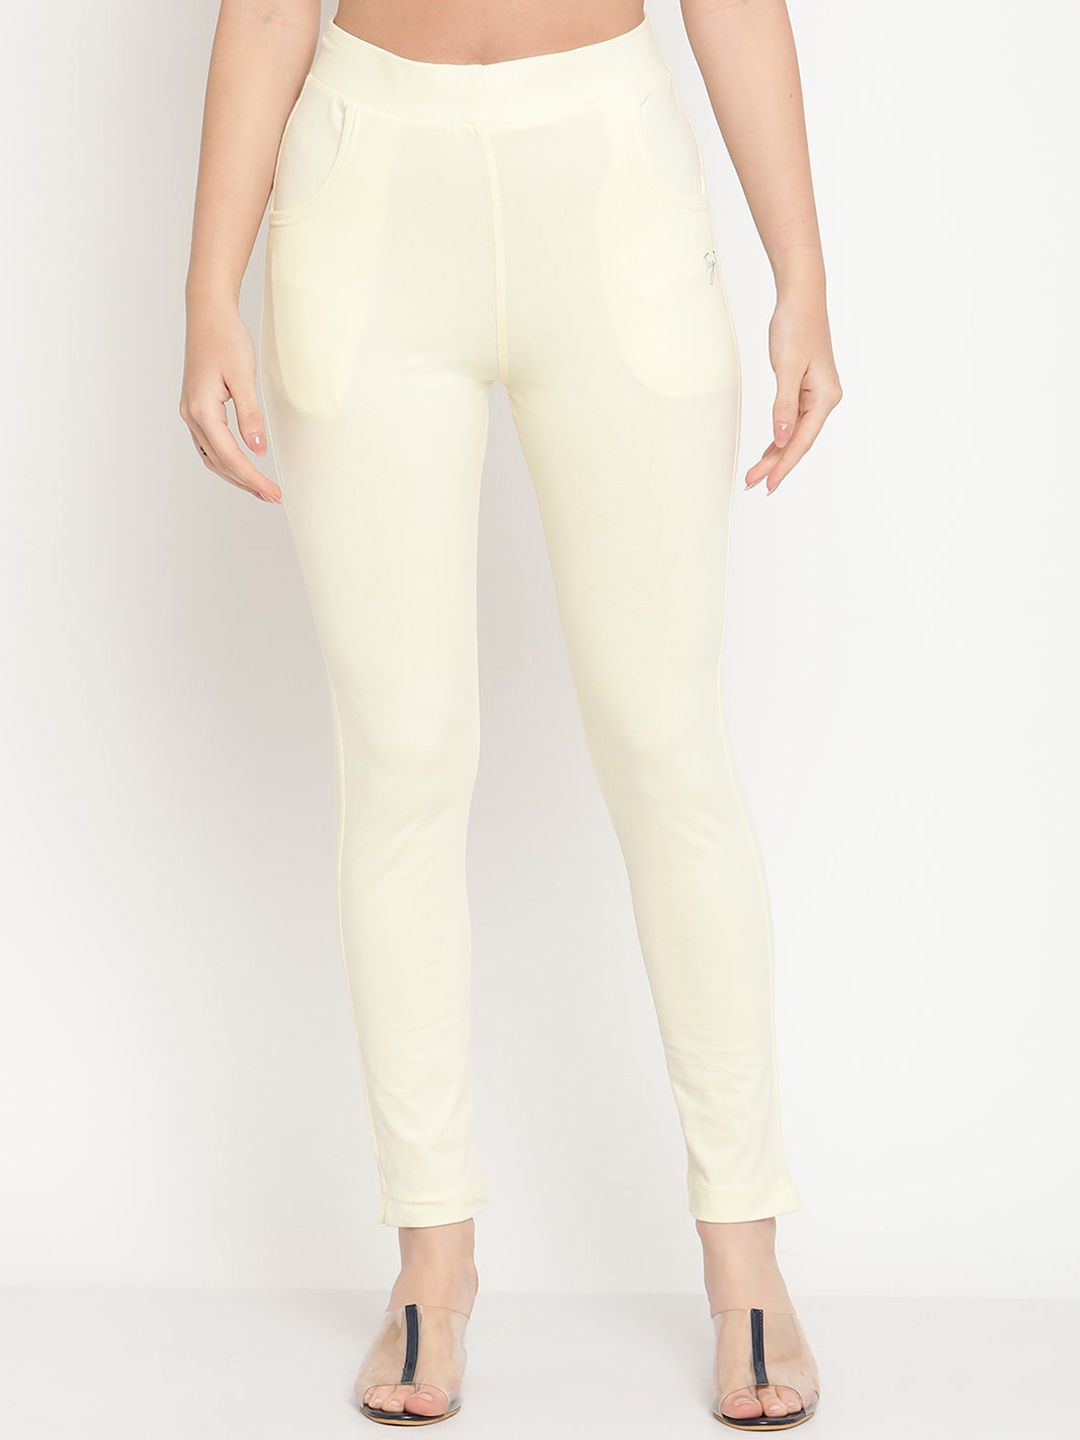 TAG 7 Women Off-White Solid Ankle Length Leggings Price in India